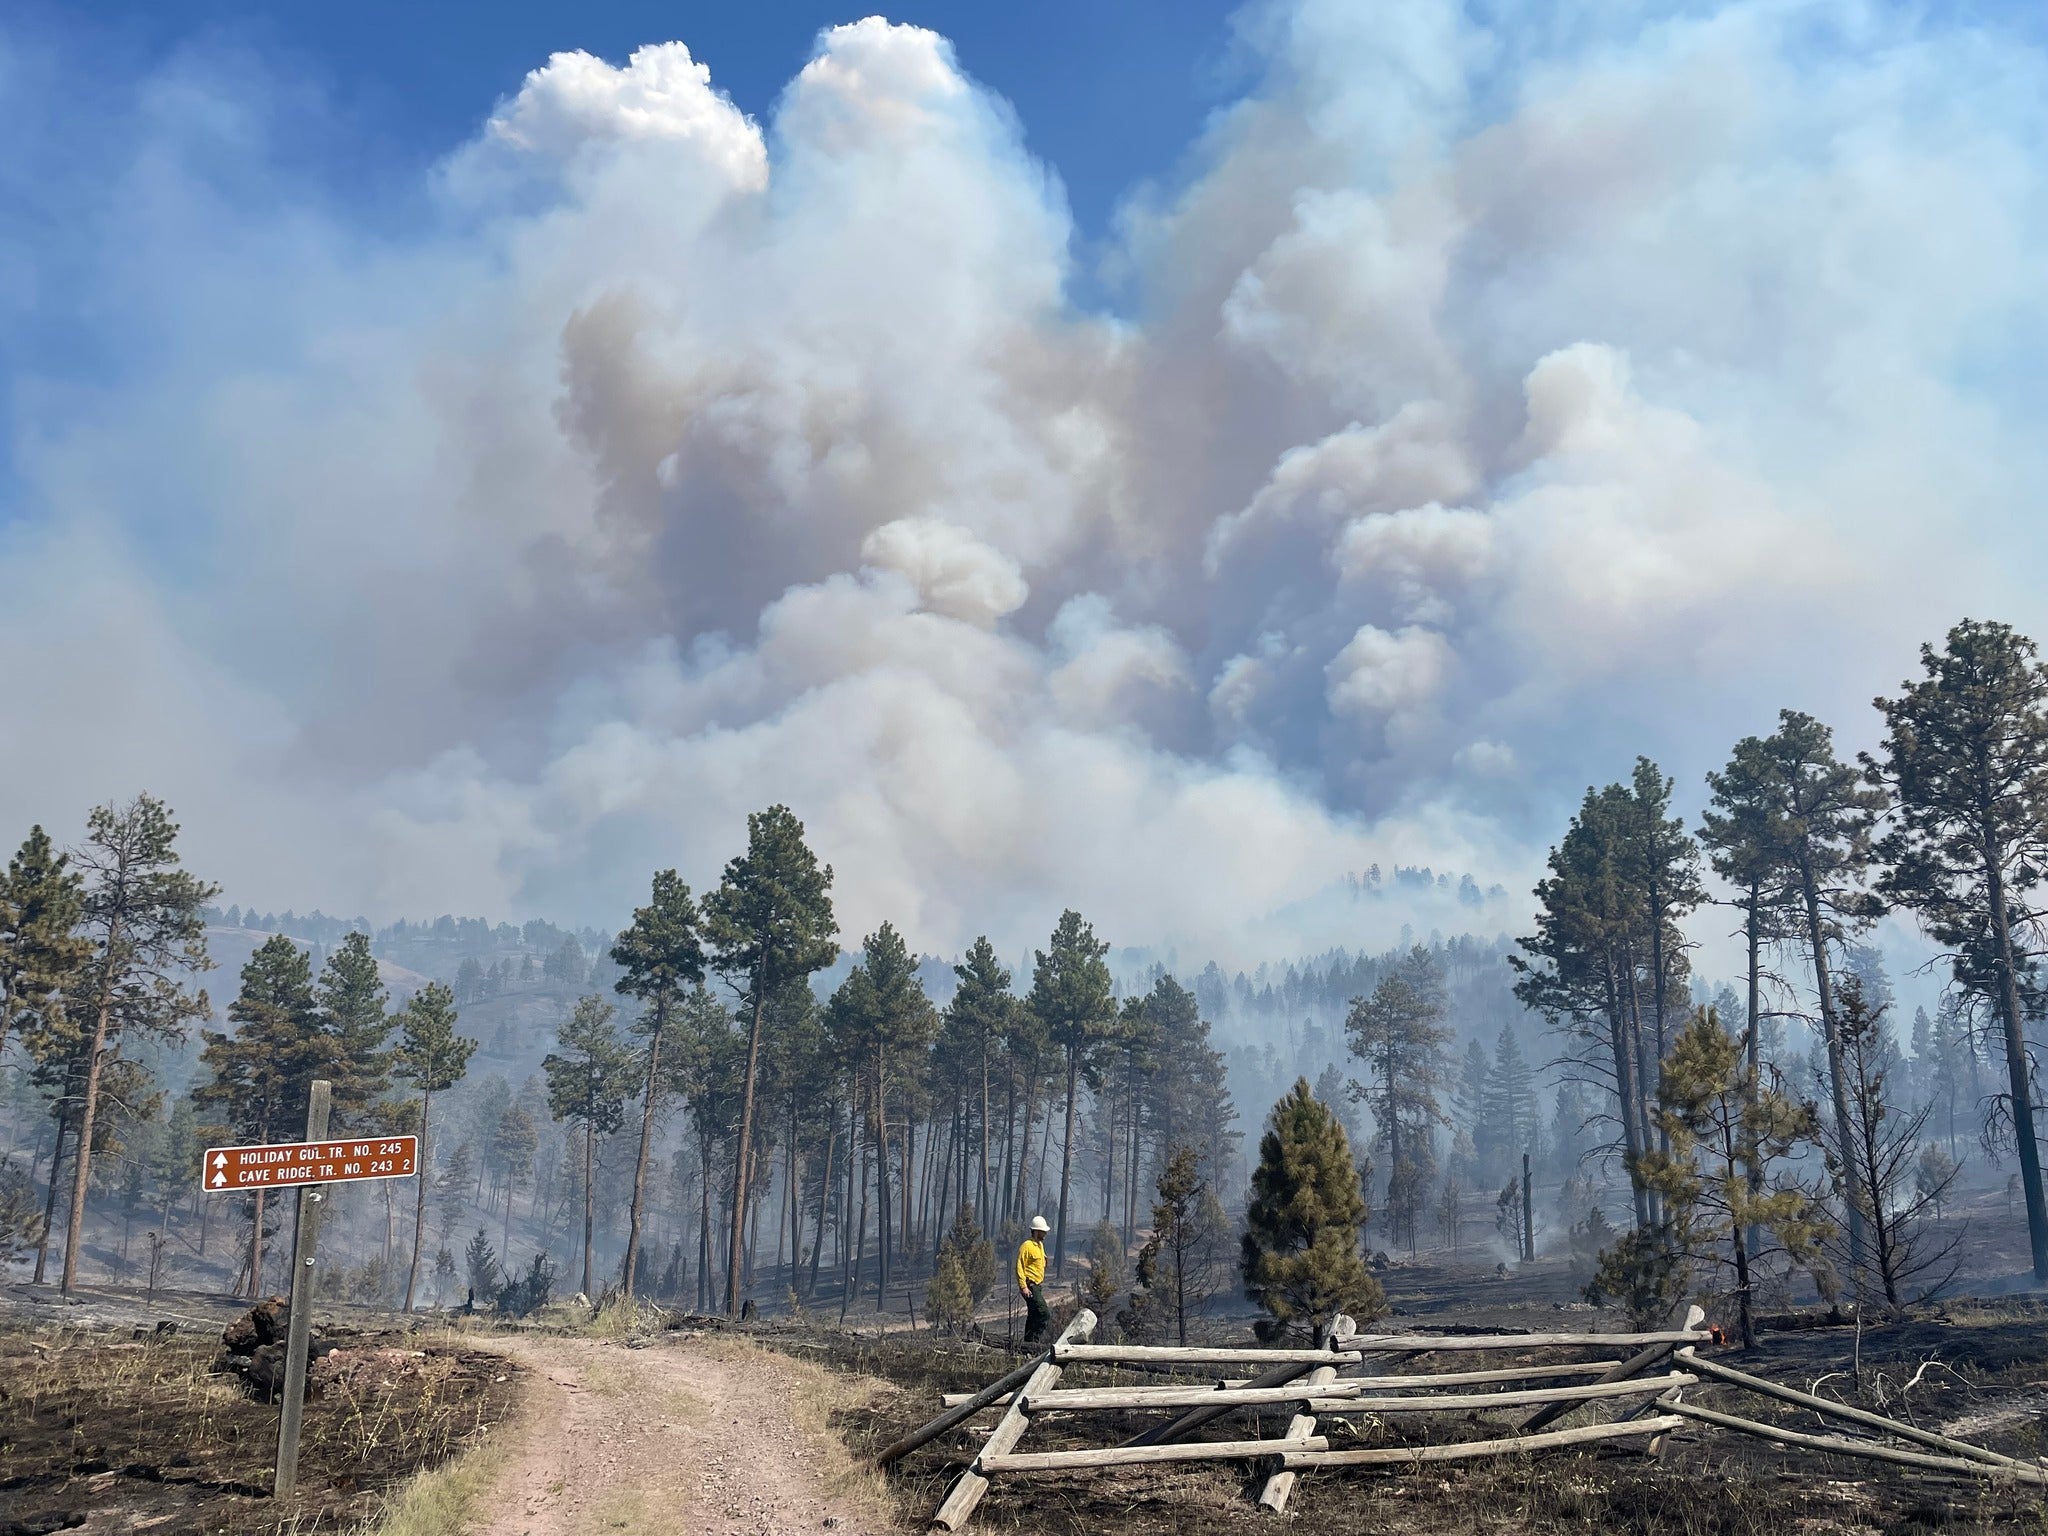 The Horse Gulch fire in Montana has spread to 2,000 acres near Helena and is 0 percent contained